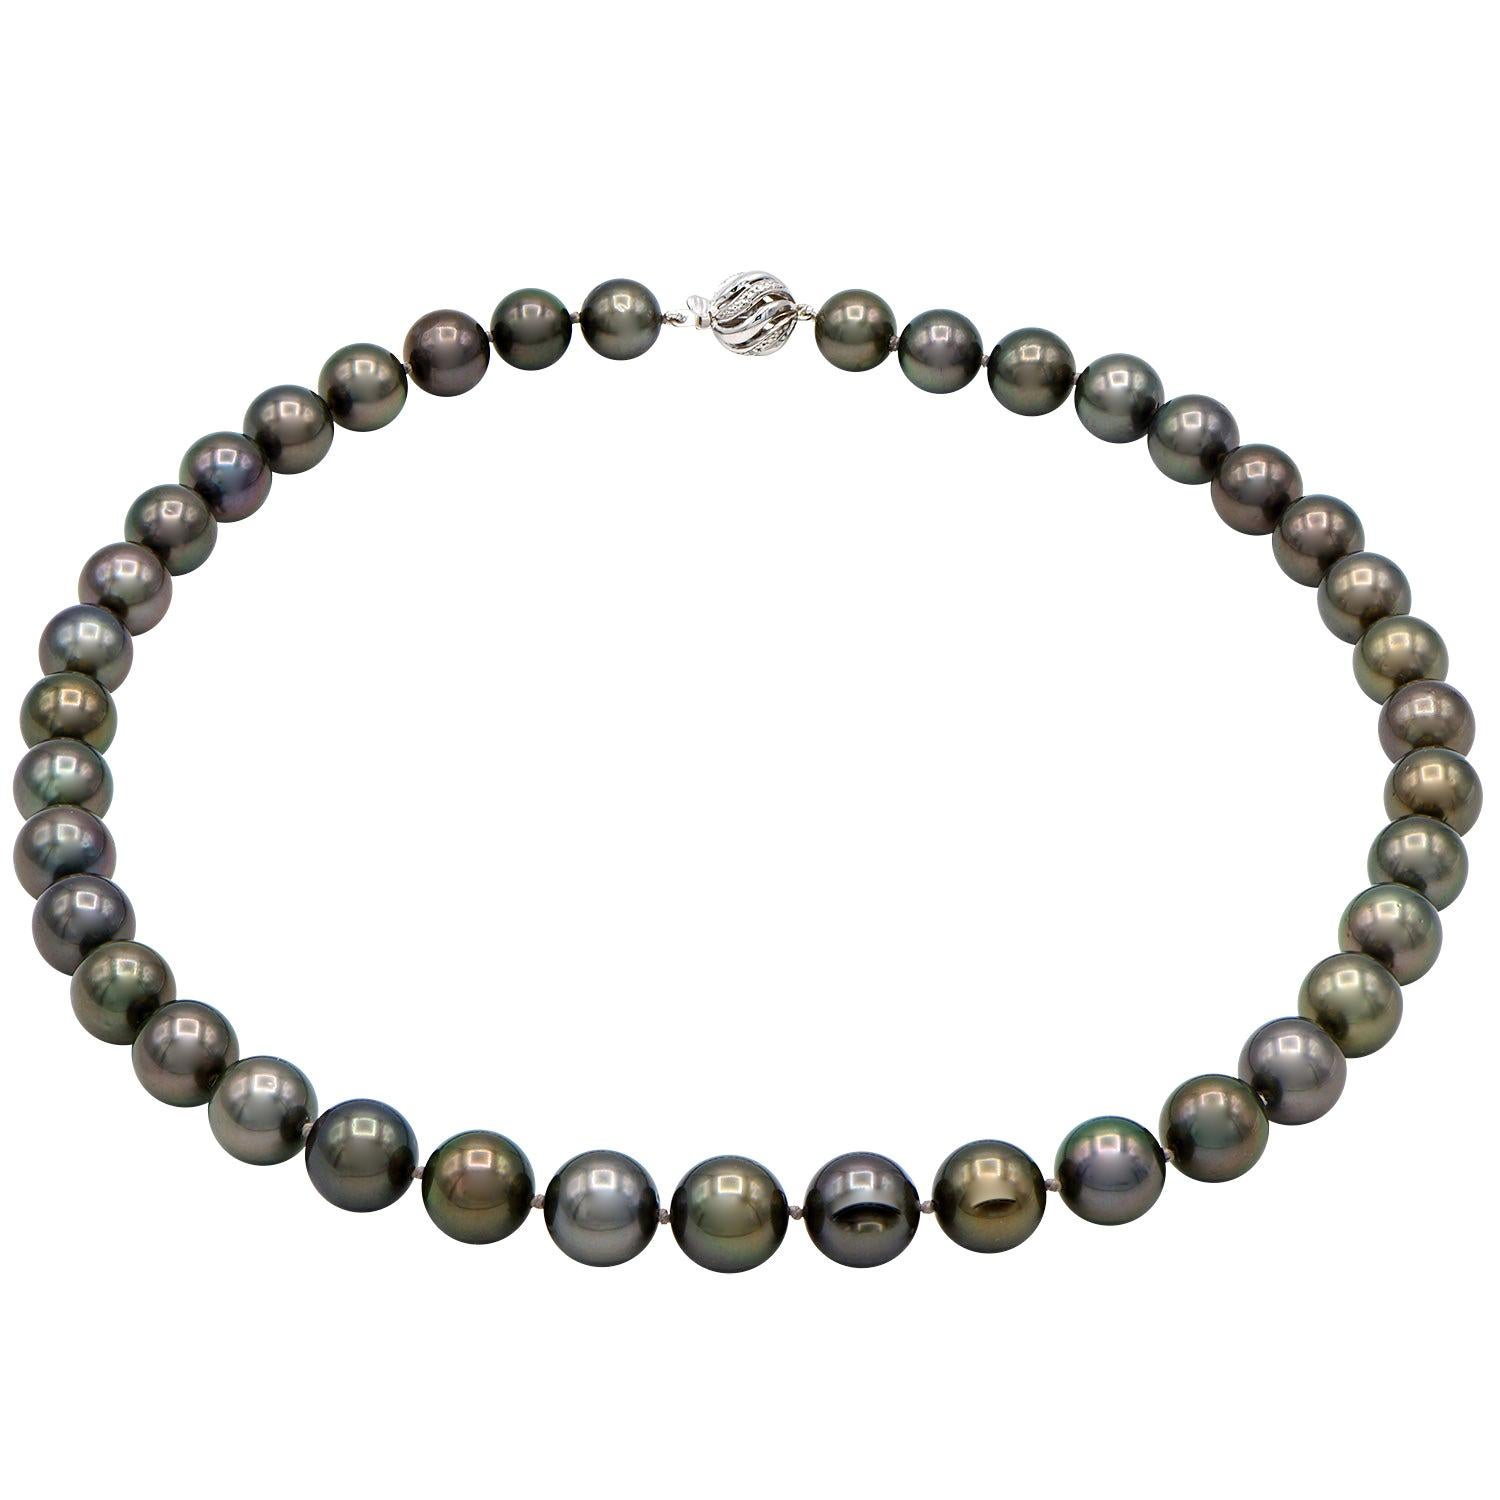 Tahitian Black Pearl Necklace with 14 Karat White Gold Ball Clasp For Sale